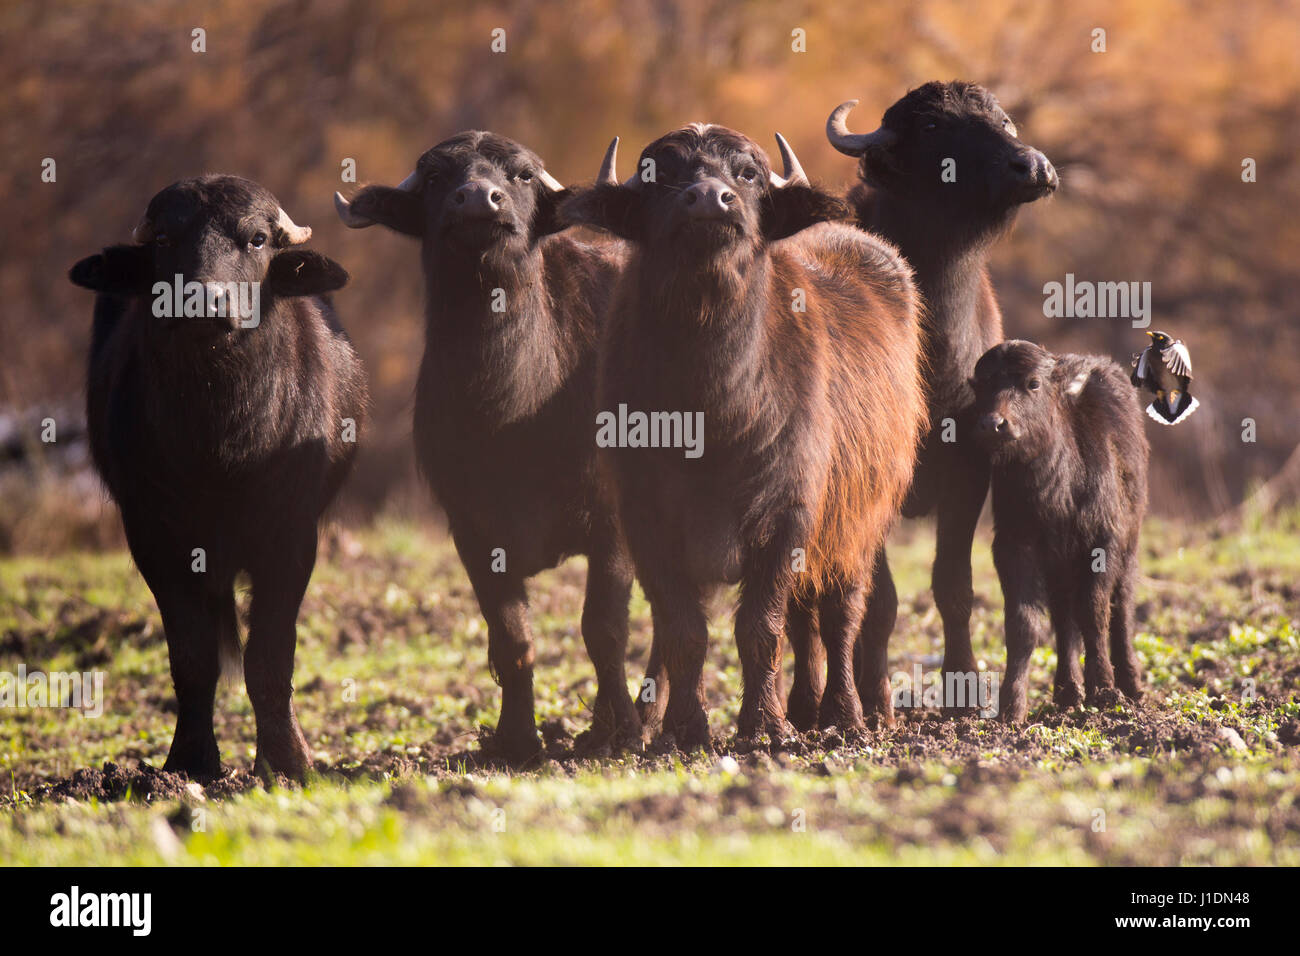 A herd of wild Water Buffaloes (Bubalus bubalis). Photographed in Ein Afek nature reserve, Israel Stock Photo